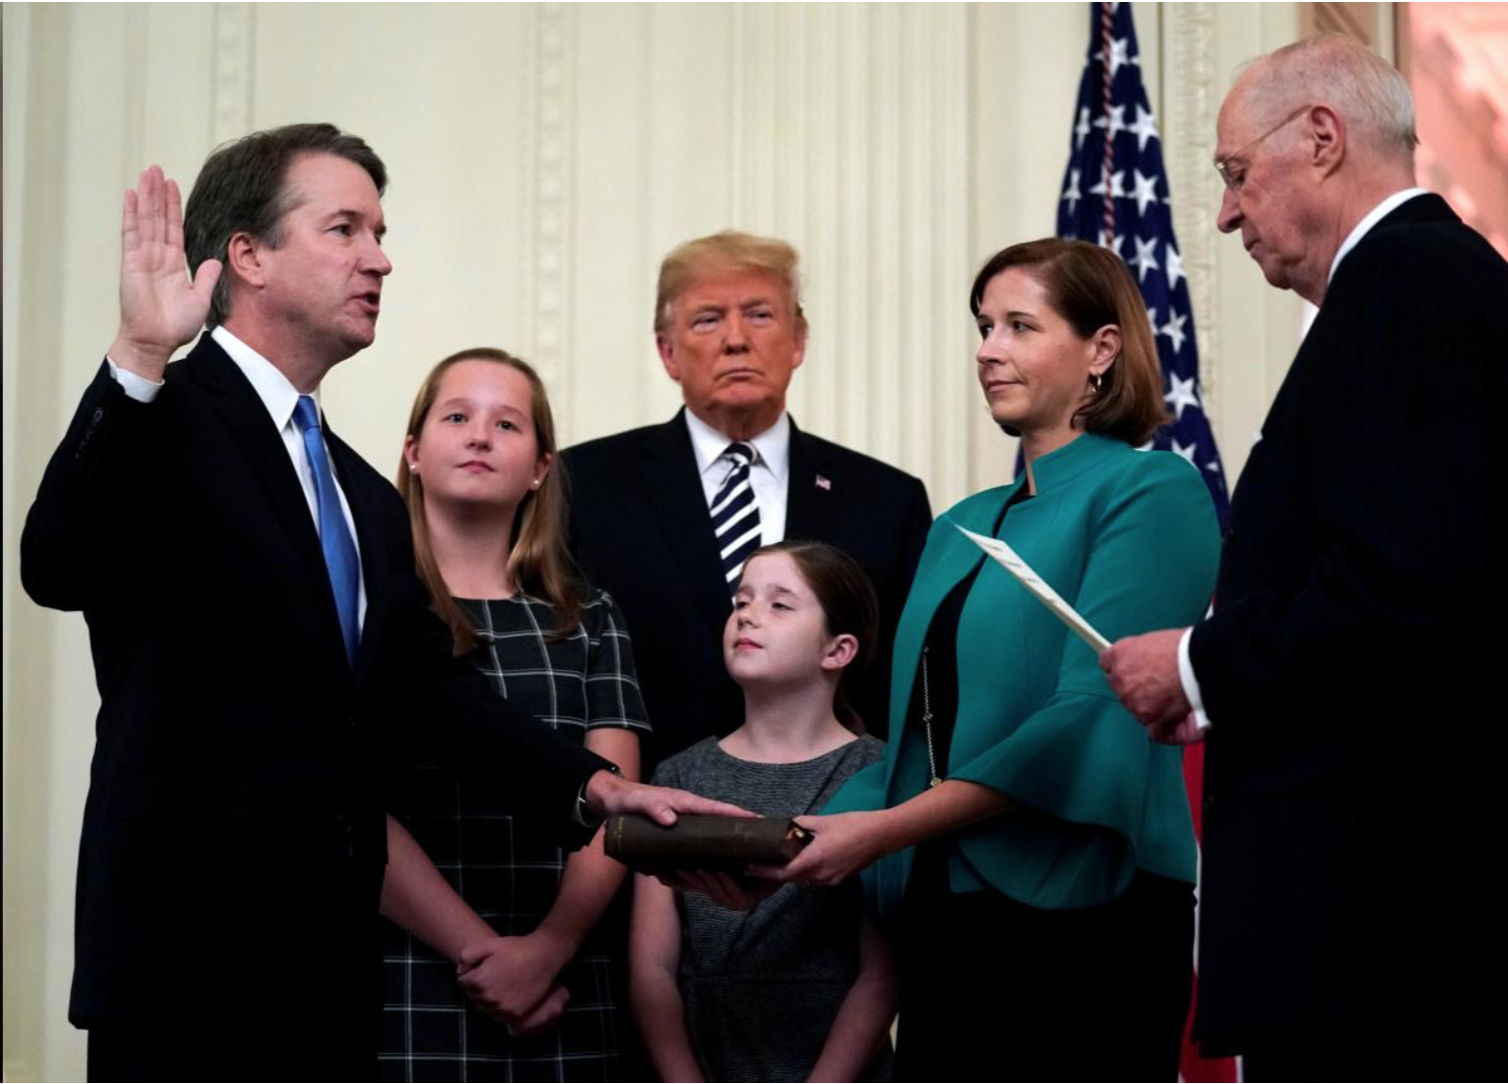 Justice Kavanaugh Publicly Sworn In At White House